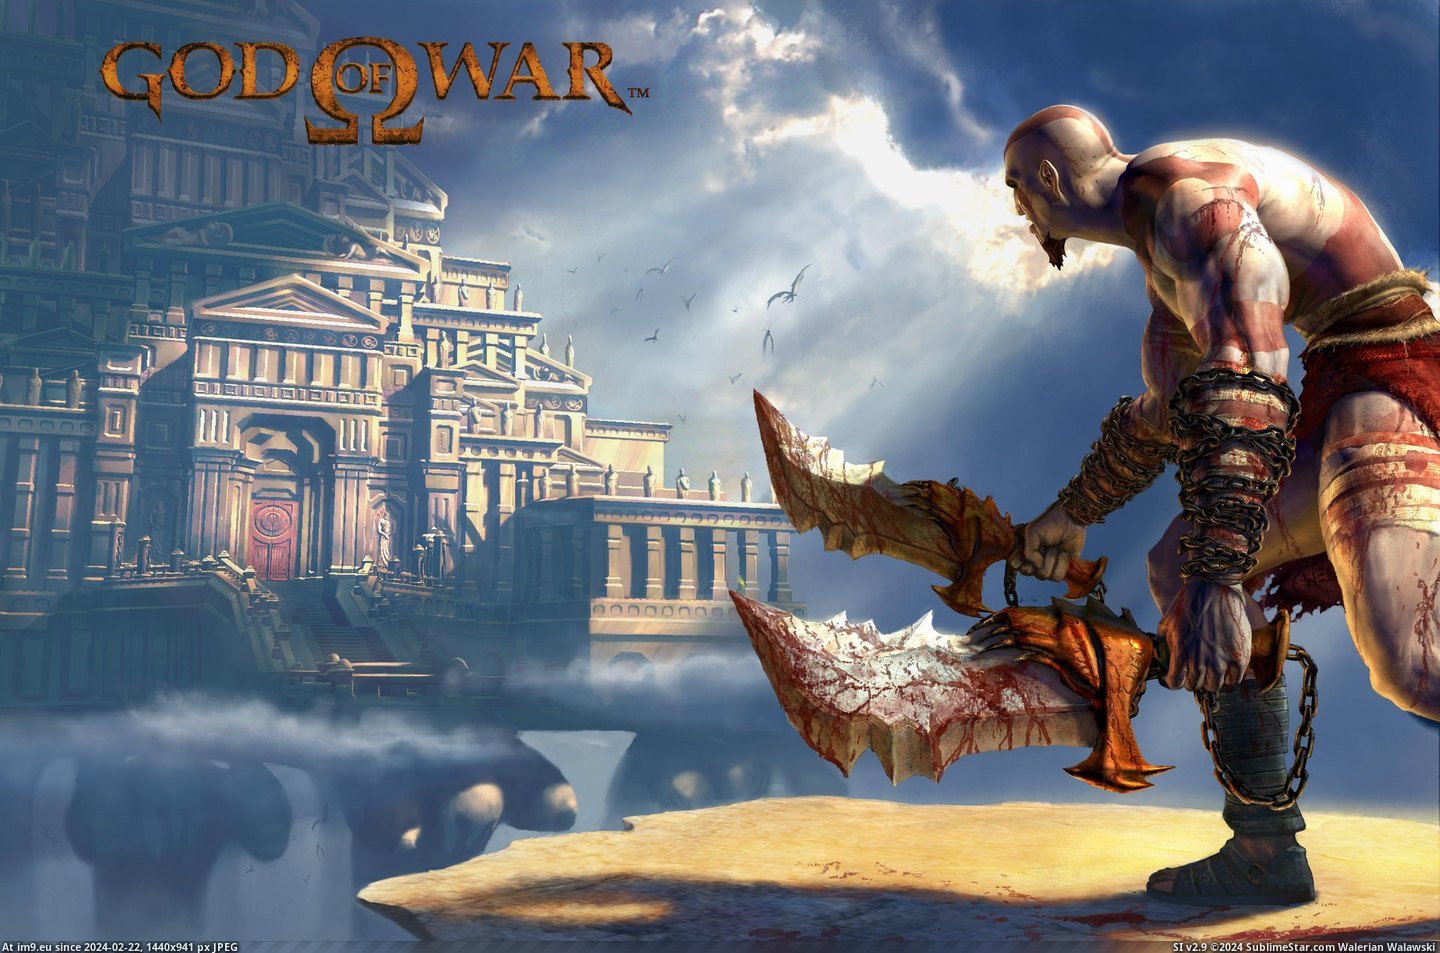 #Game #War #God #Video Video Game God Of War 2898 Pic. (Image of album Games Wallpapers))